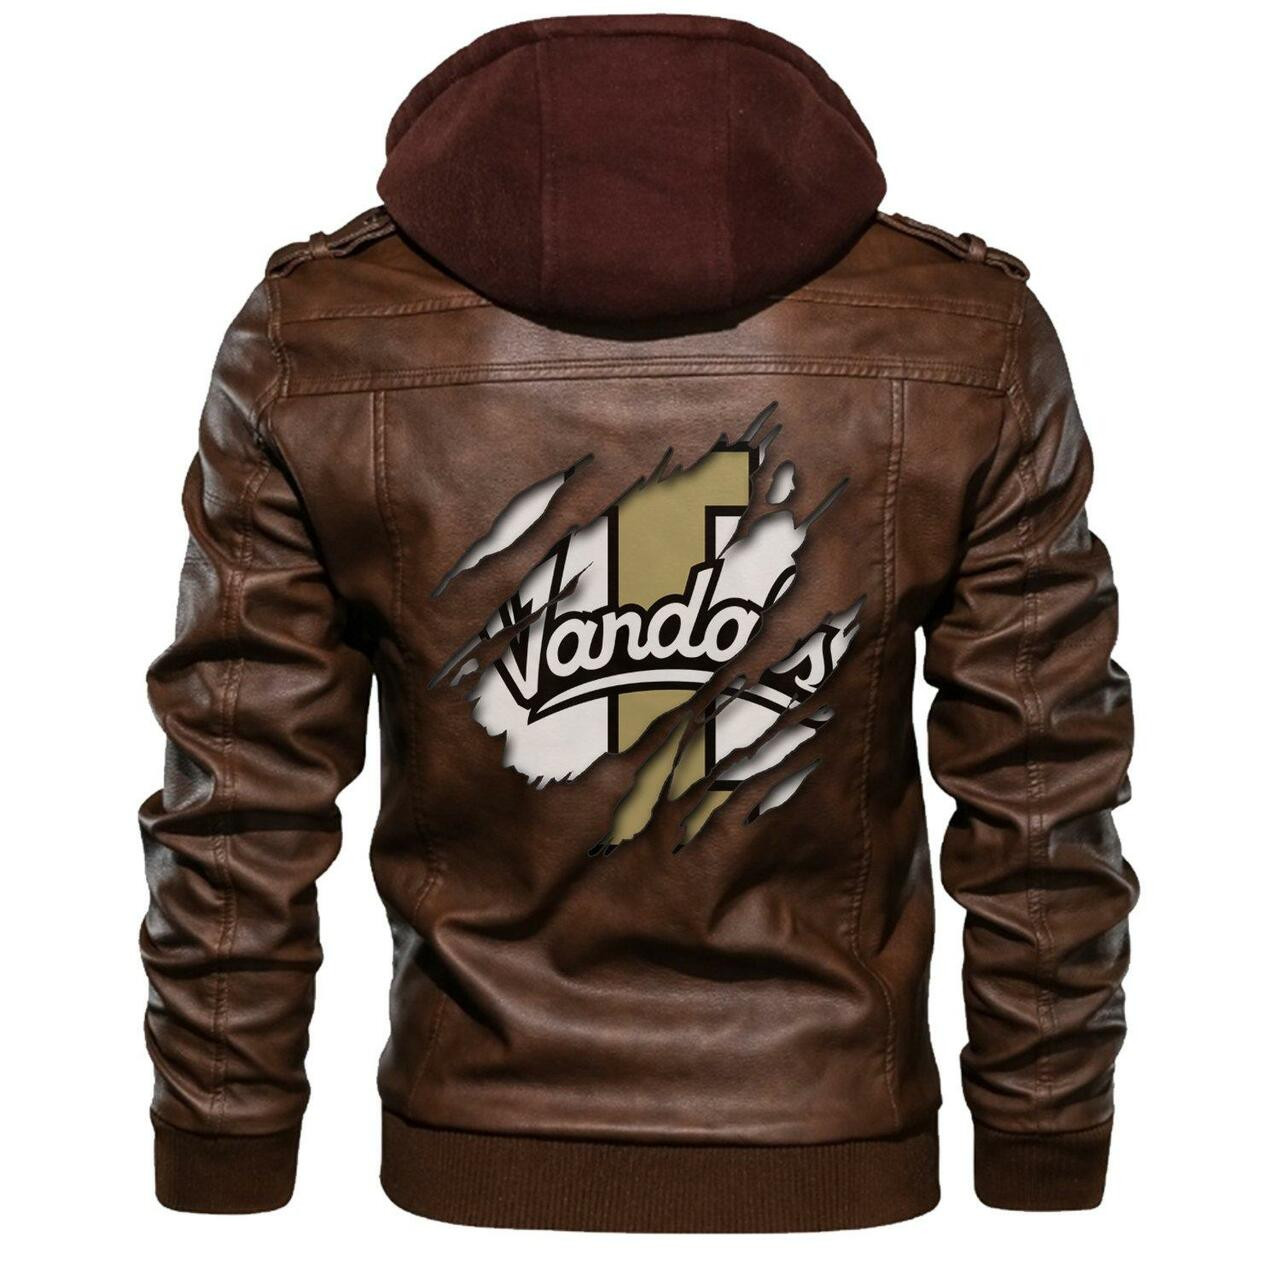 Our store has all of the latest leather jacket 98